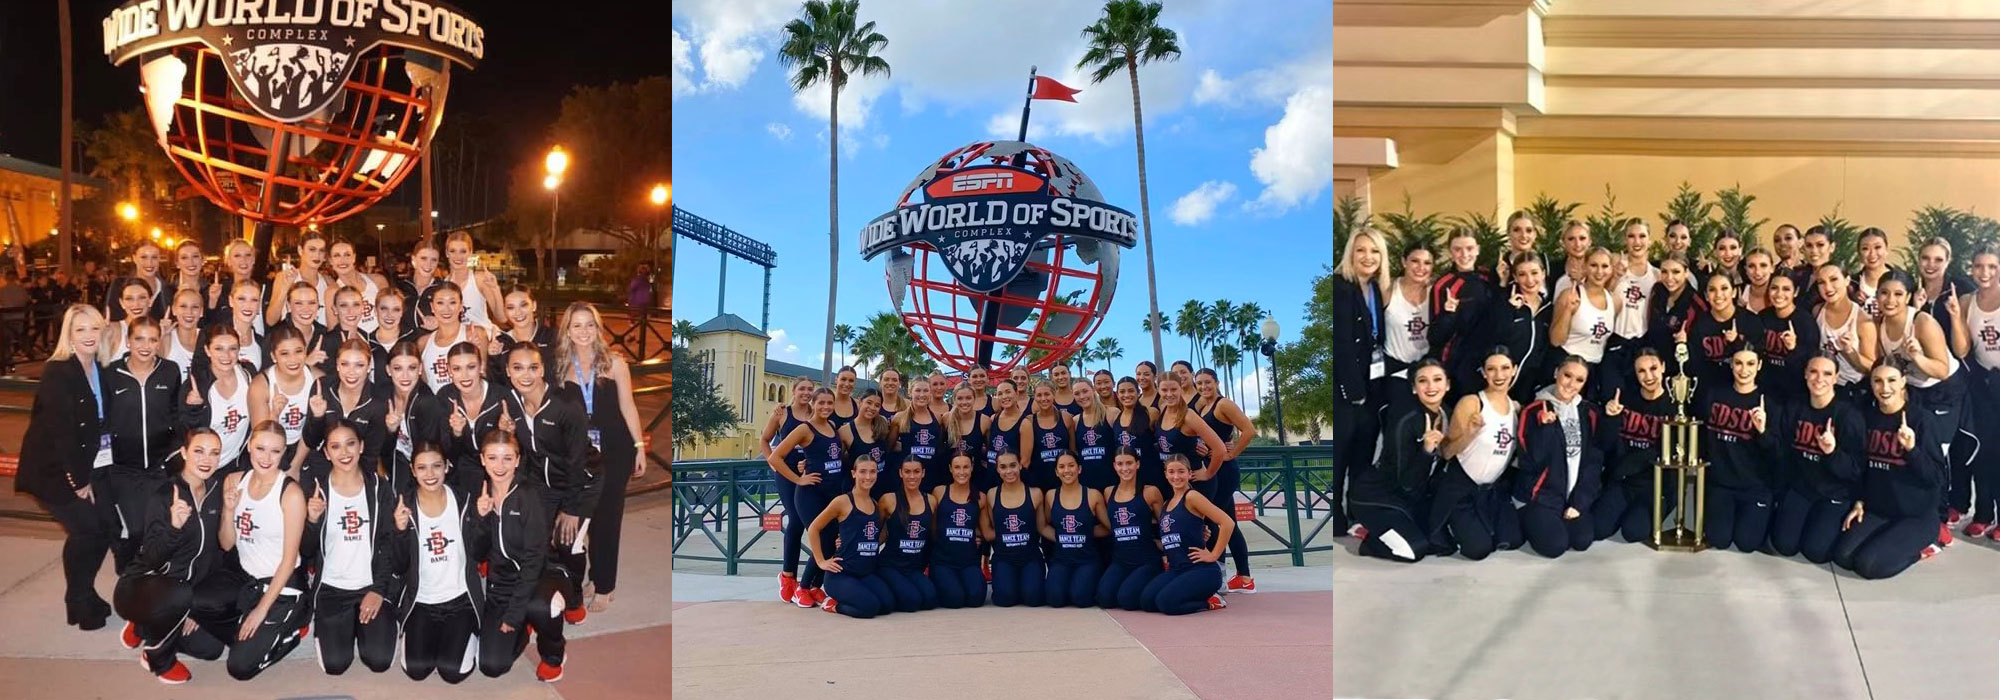 The Dance Club team posing at the Dance National Championships (left, center) and the team posing with their Championship trophy (right)